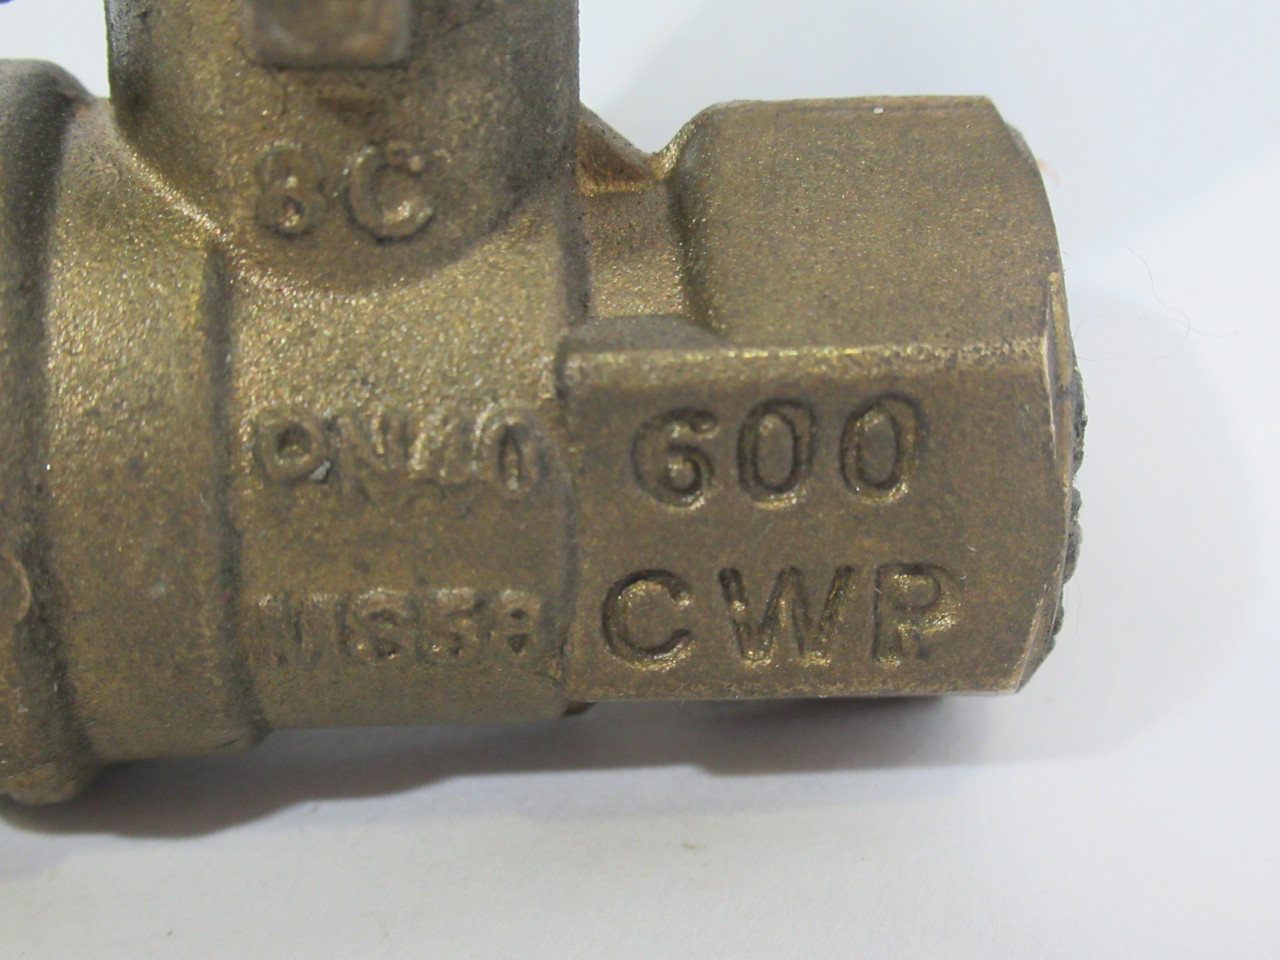 DynaQuip S92 Brass Ball Valve 3/8" FNPT PN40 600CWP 1/2 psi 150 WSP USED